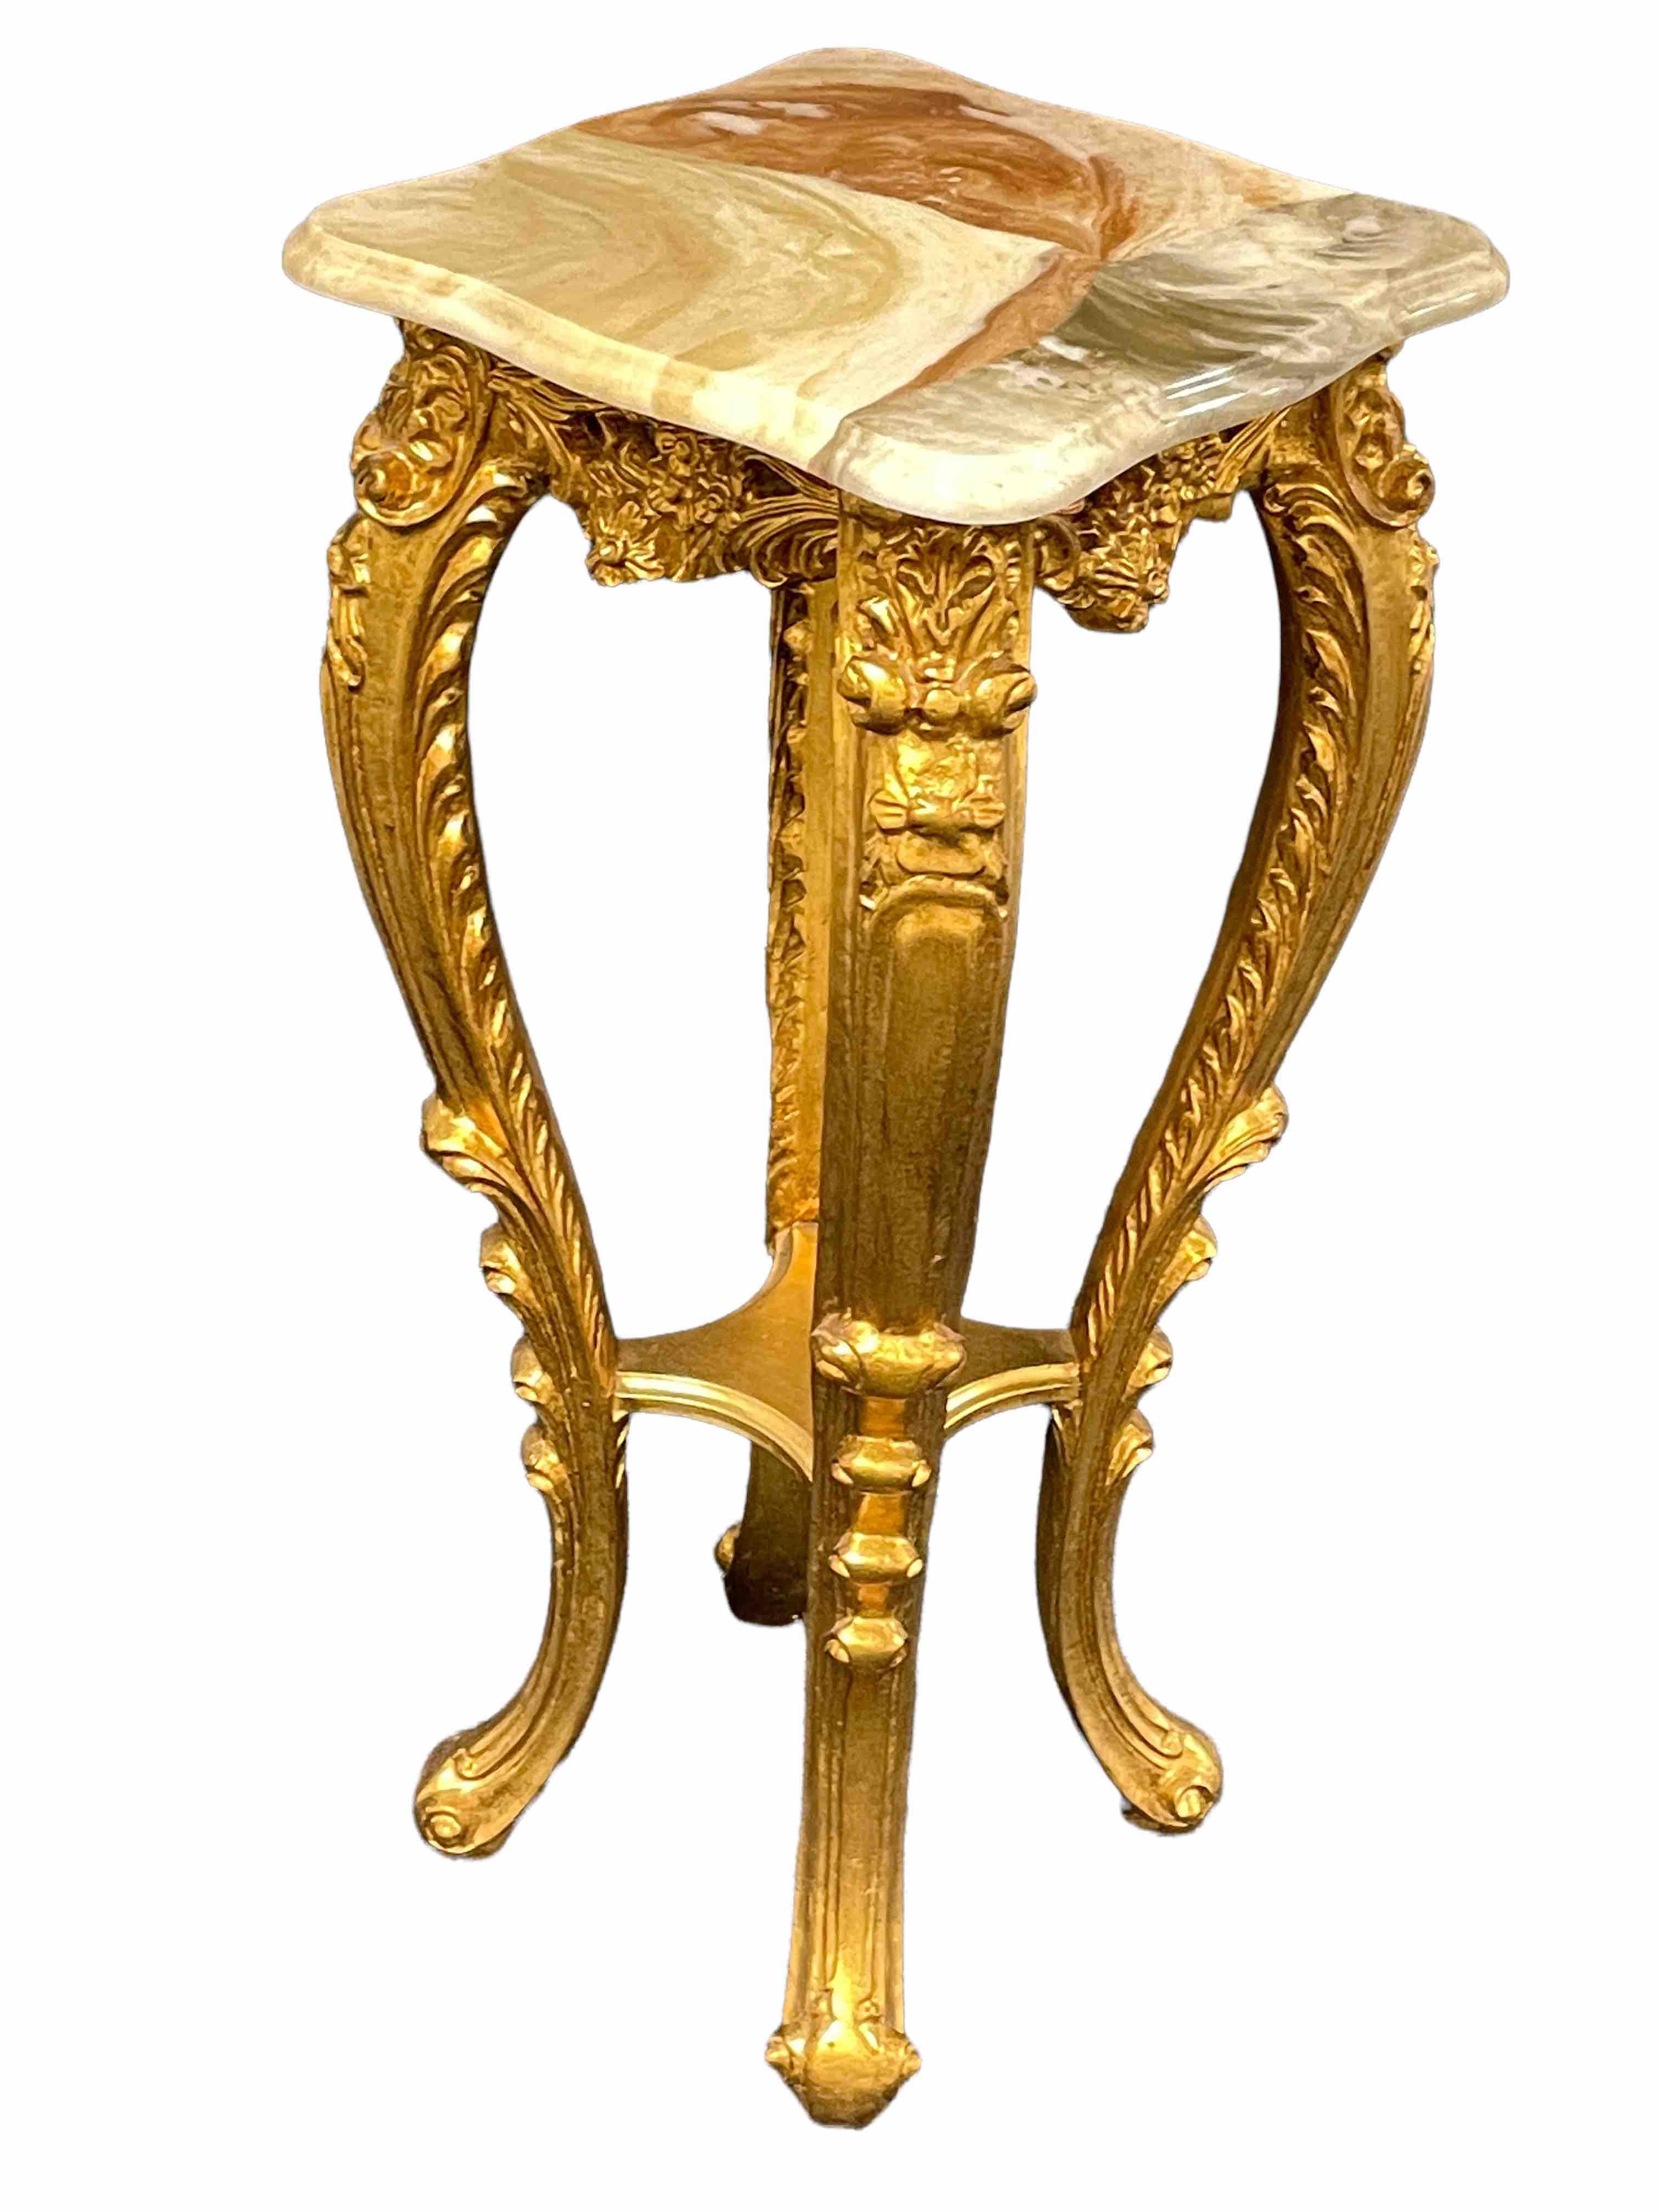 20th Century Carved Gilt Wood Toleware Console Pedestal Table, Italy For Sale 3